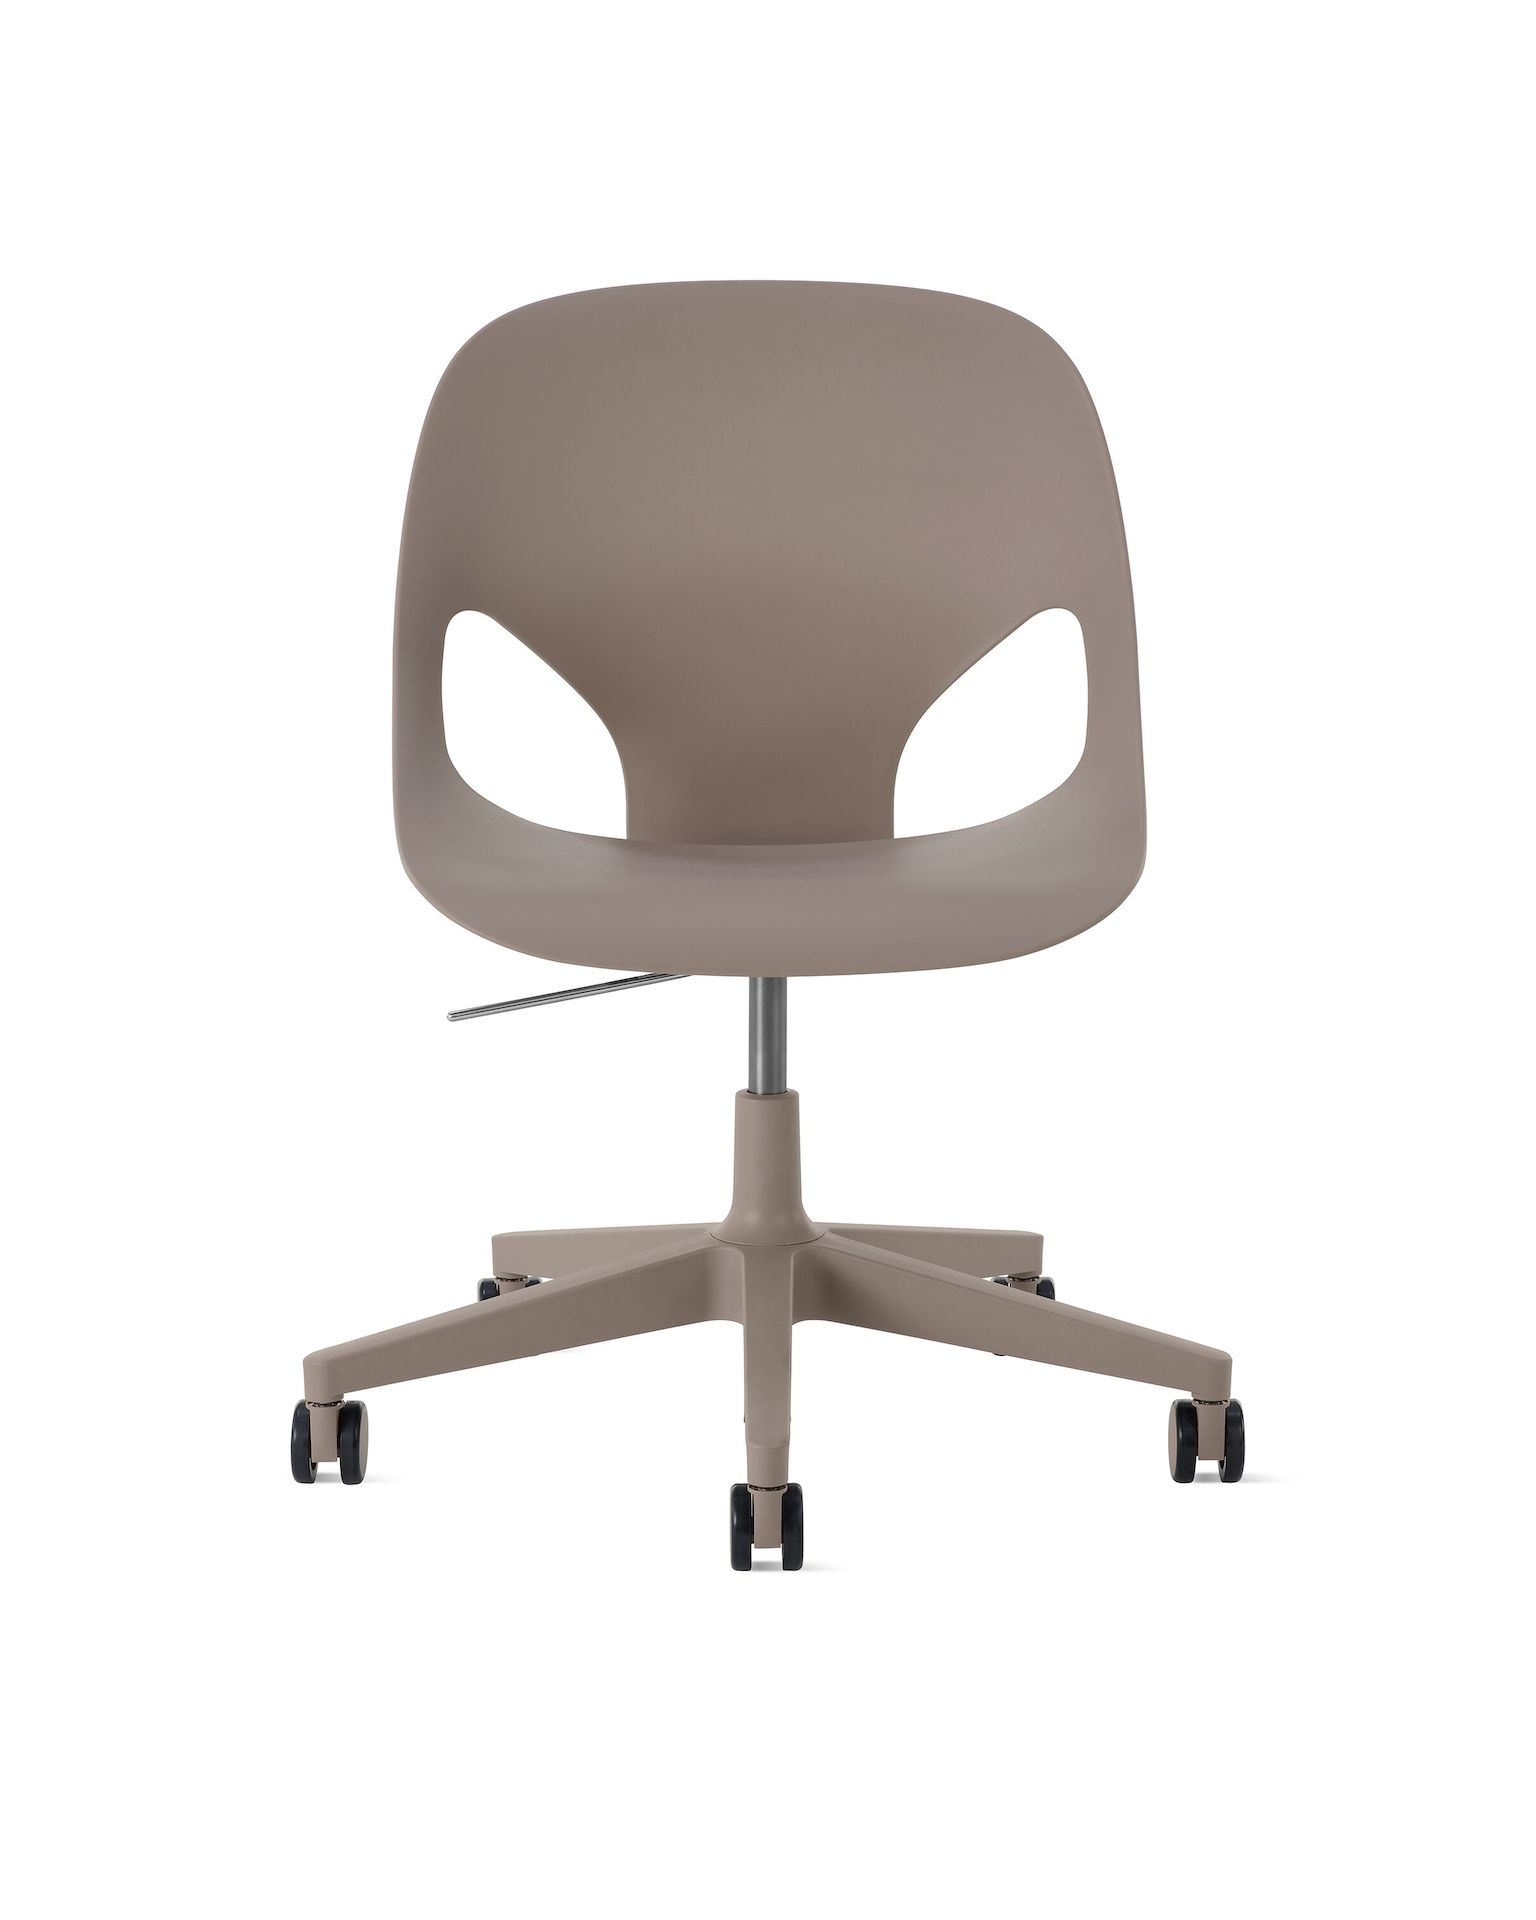 Front view of a light brown armless Zeph chair.